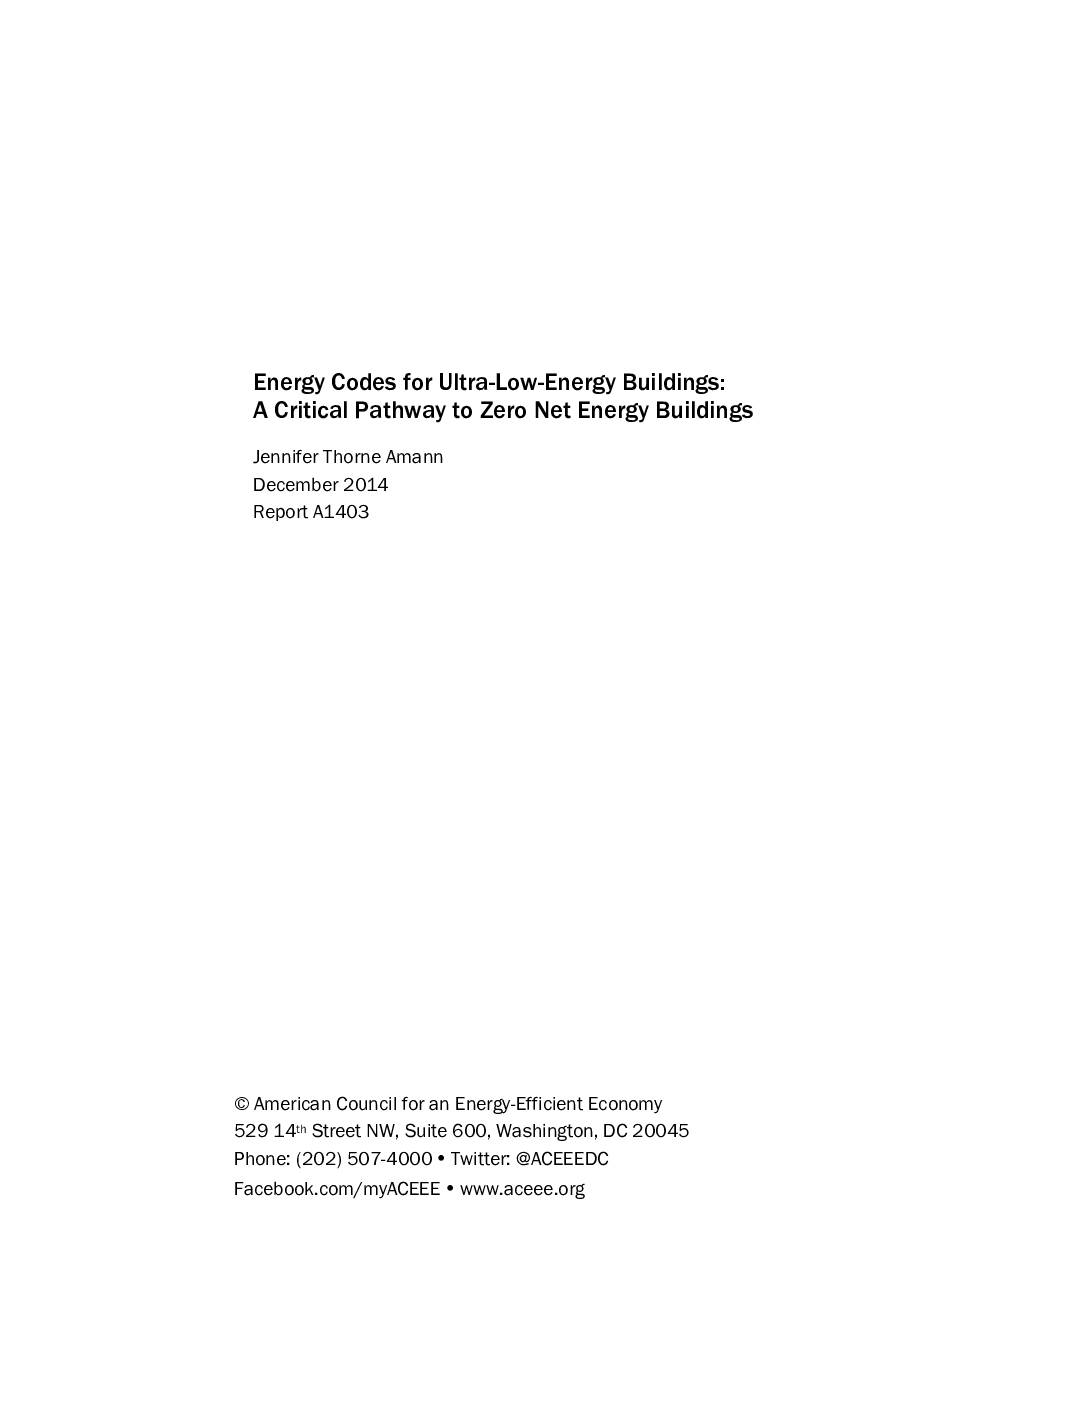 Energy Codes for Ultra-Low-Energy Buildings: A Critical Pathway to Zero Net Energy Buildings